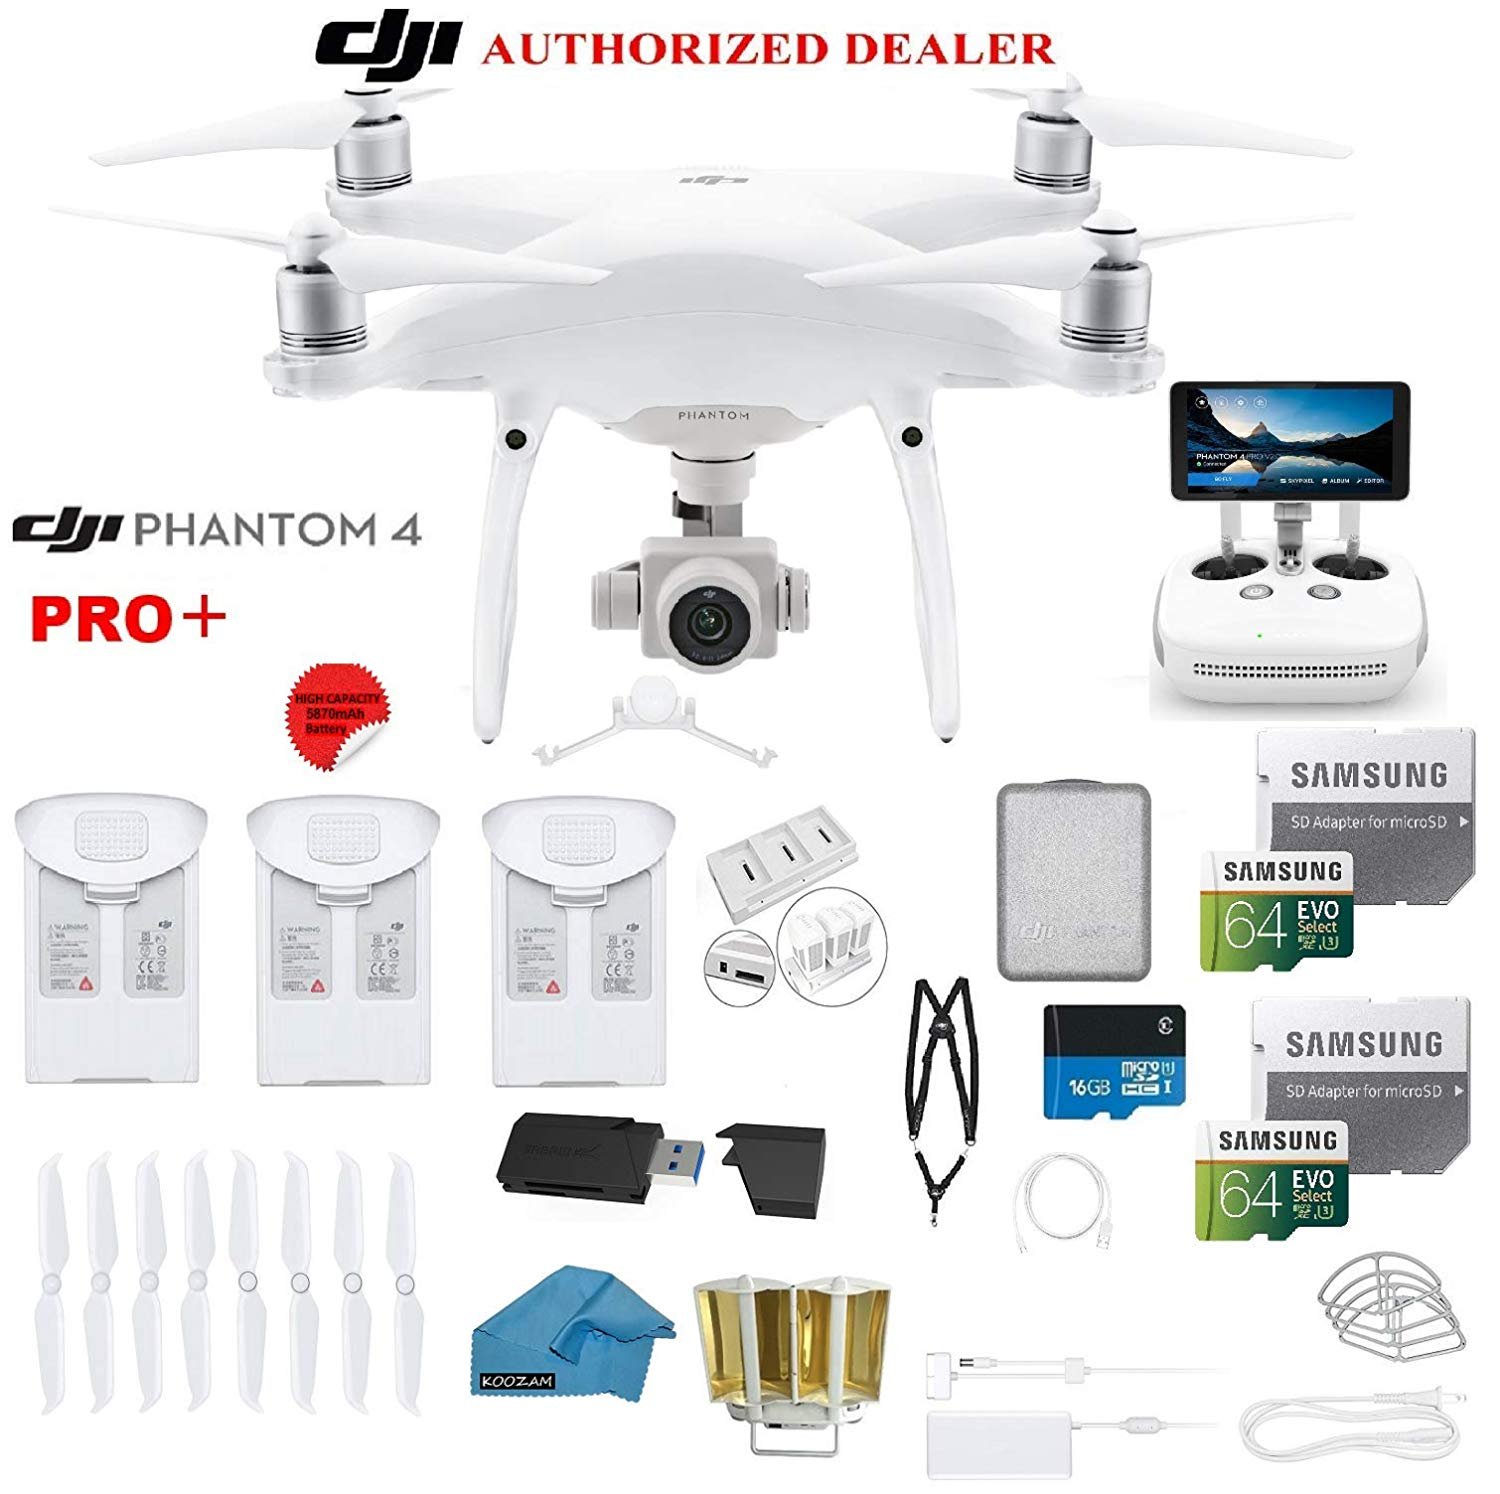 dji phantom 4 pro plus (pro+)quadcopter drone with 1-inch 20mp 4k camera kit with built in monitor + 3 total dji batteries + 2 64gb micro sd cards + reader + guards + range extender + charging hub - image 2 of 5